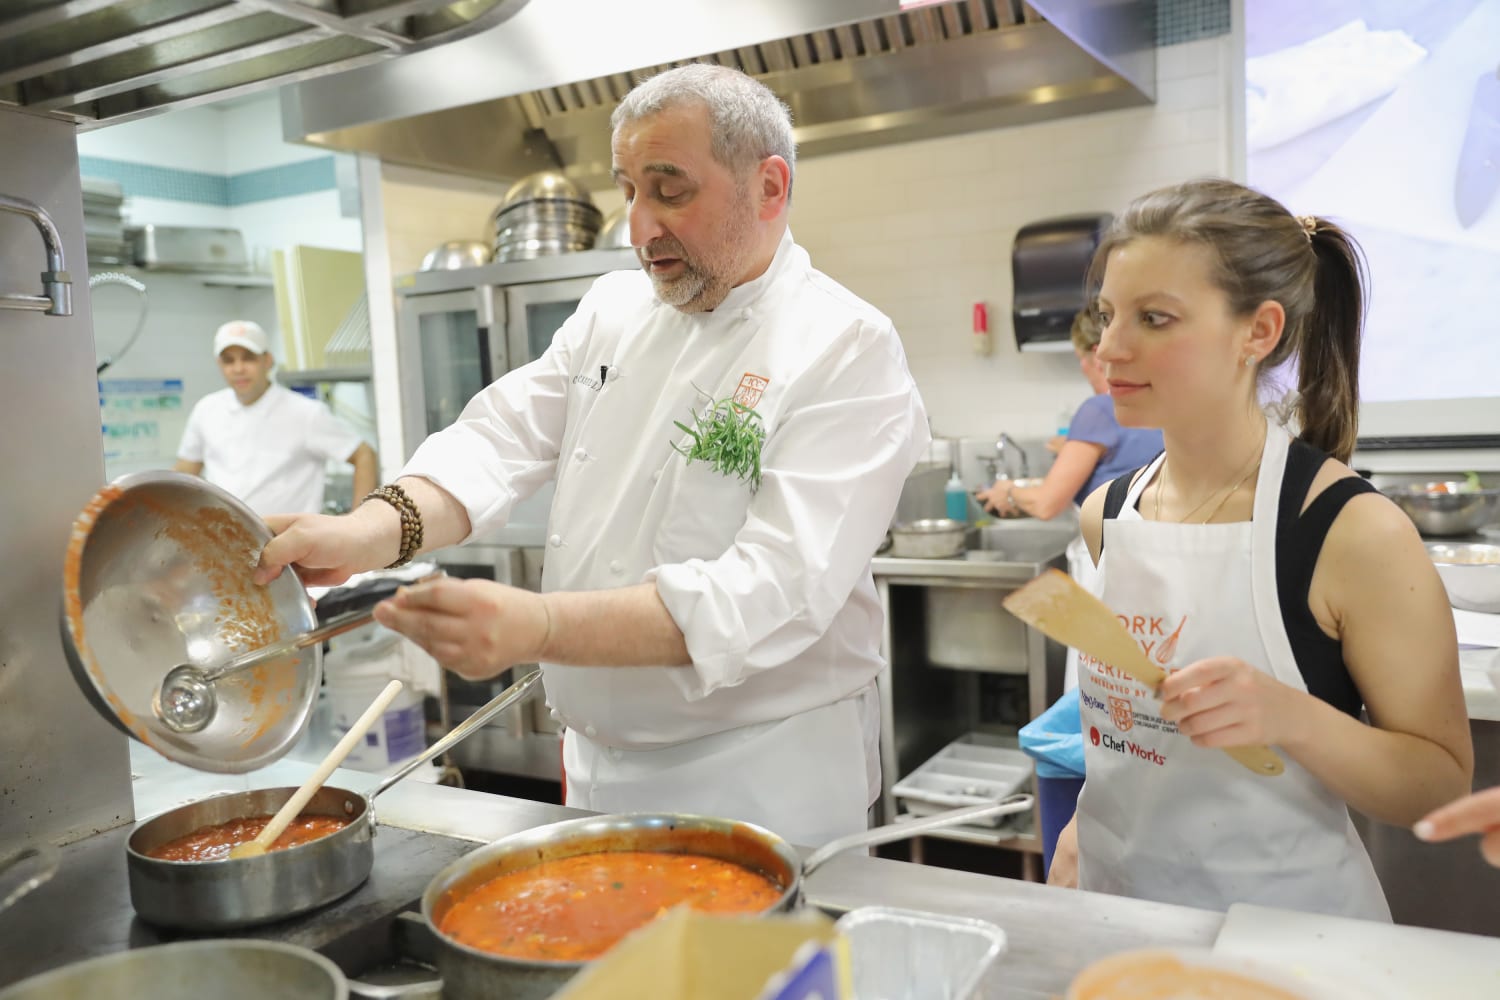 https://media-cldnry.s-nbcnews.com/image/upload/newscms/2016_16/1054221/nyculinary-cesare-casella-today-inline-160419.jpg